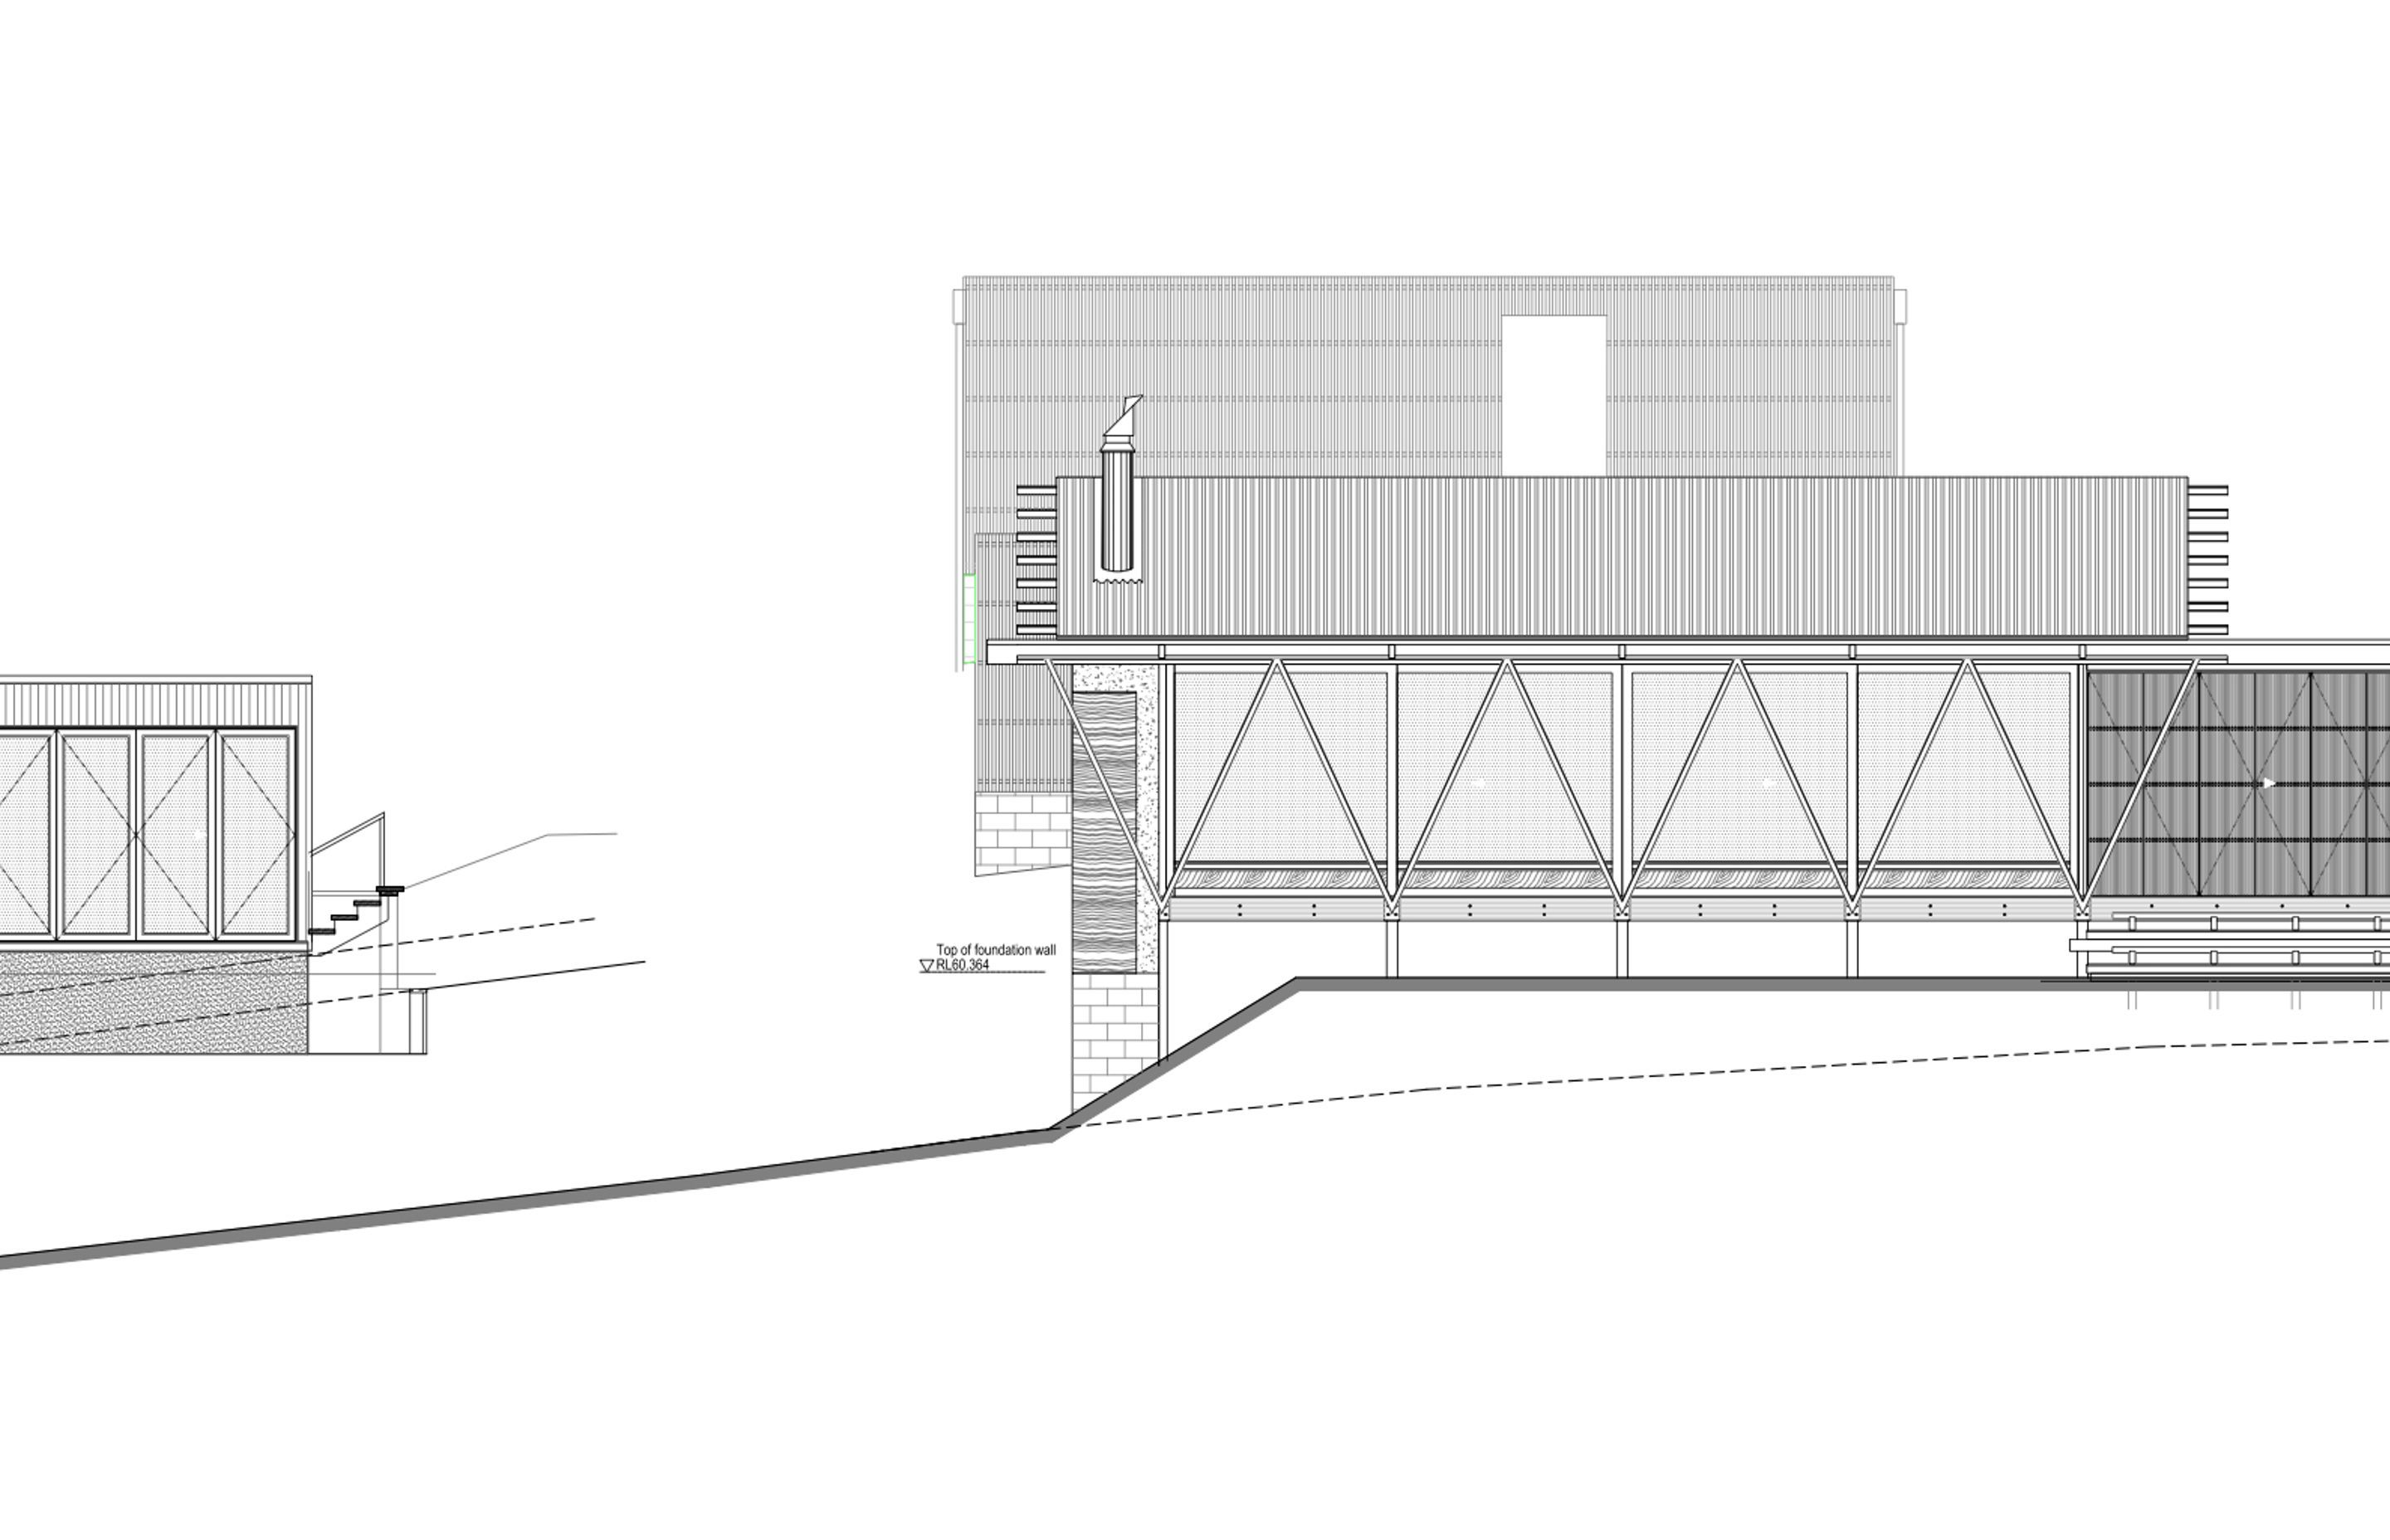 The east elevation of Tutukaka House, by Herbst Architects, shows the swimming pool (left), the lanai or veranda (front), with the bedroom wing and garage layered up in behind.